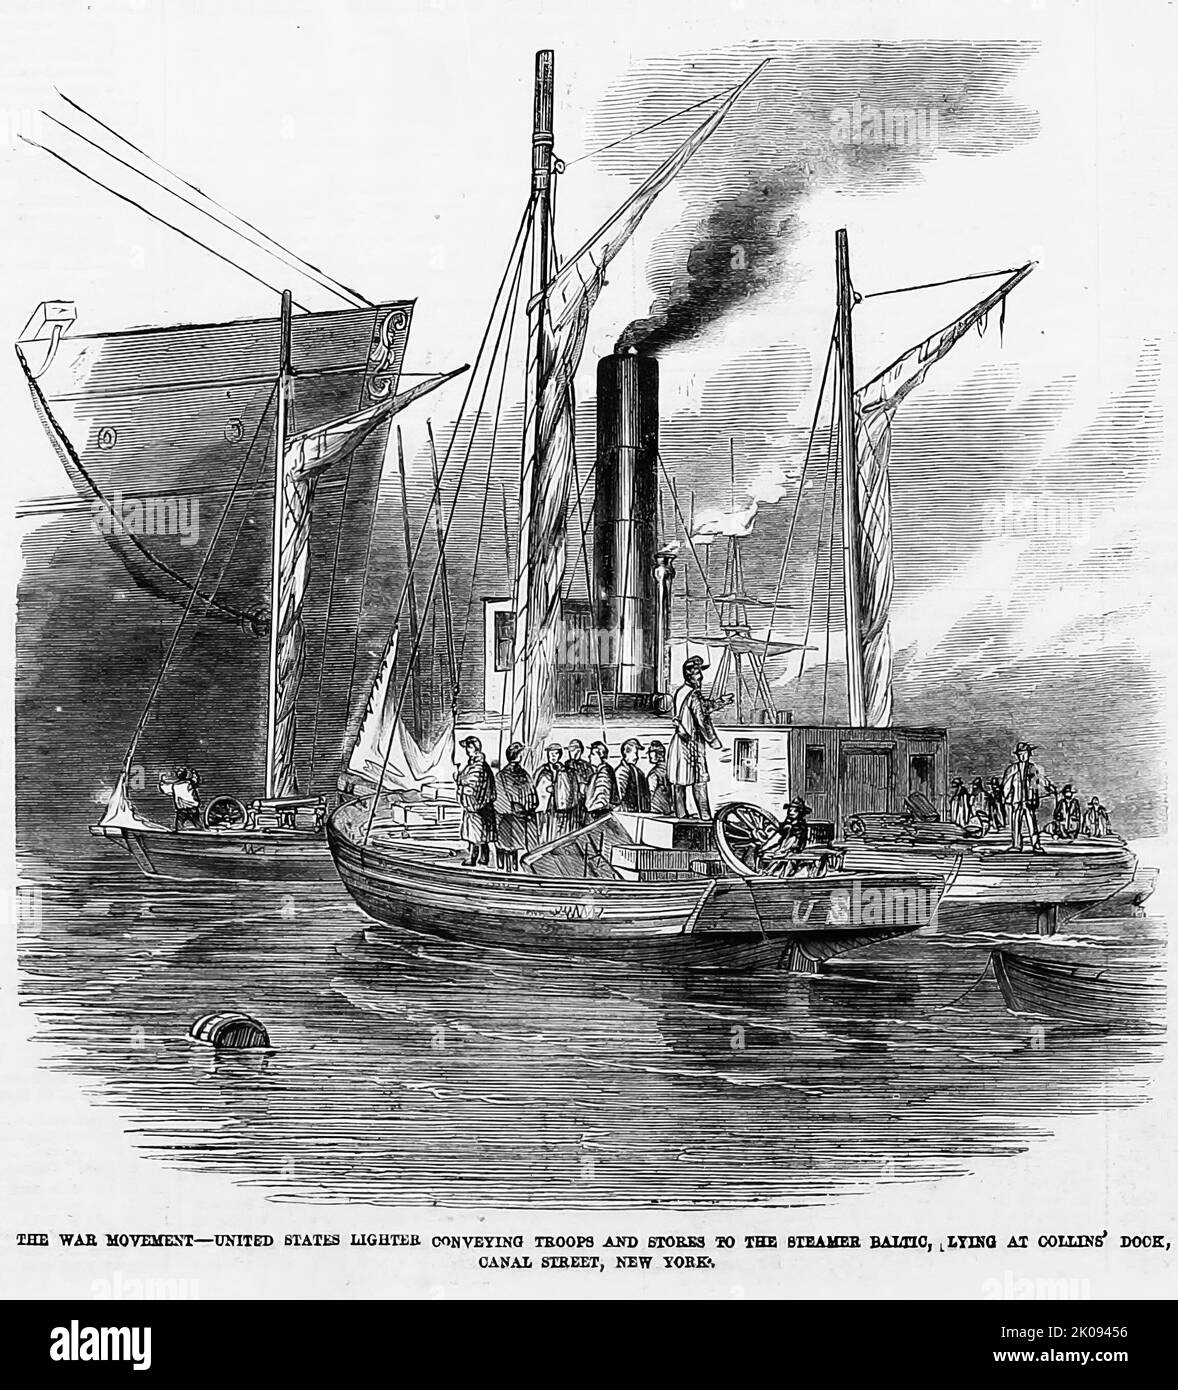 The war movement - United States lighter conveying troops and stores to the steamer Baltic, lying at Collins' dock, Canal Street, New York, April 6th, 1861. Departure of steamships Atlantic, Baltic and Illinois, with troops to be employed against the Seceded States. 19th century American Civil War illustration from Frank Leslie's Illustrated Newspaper Stock Photo